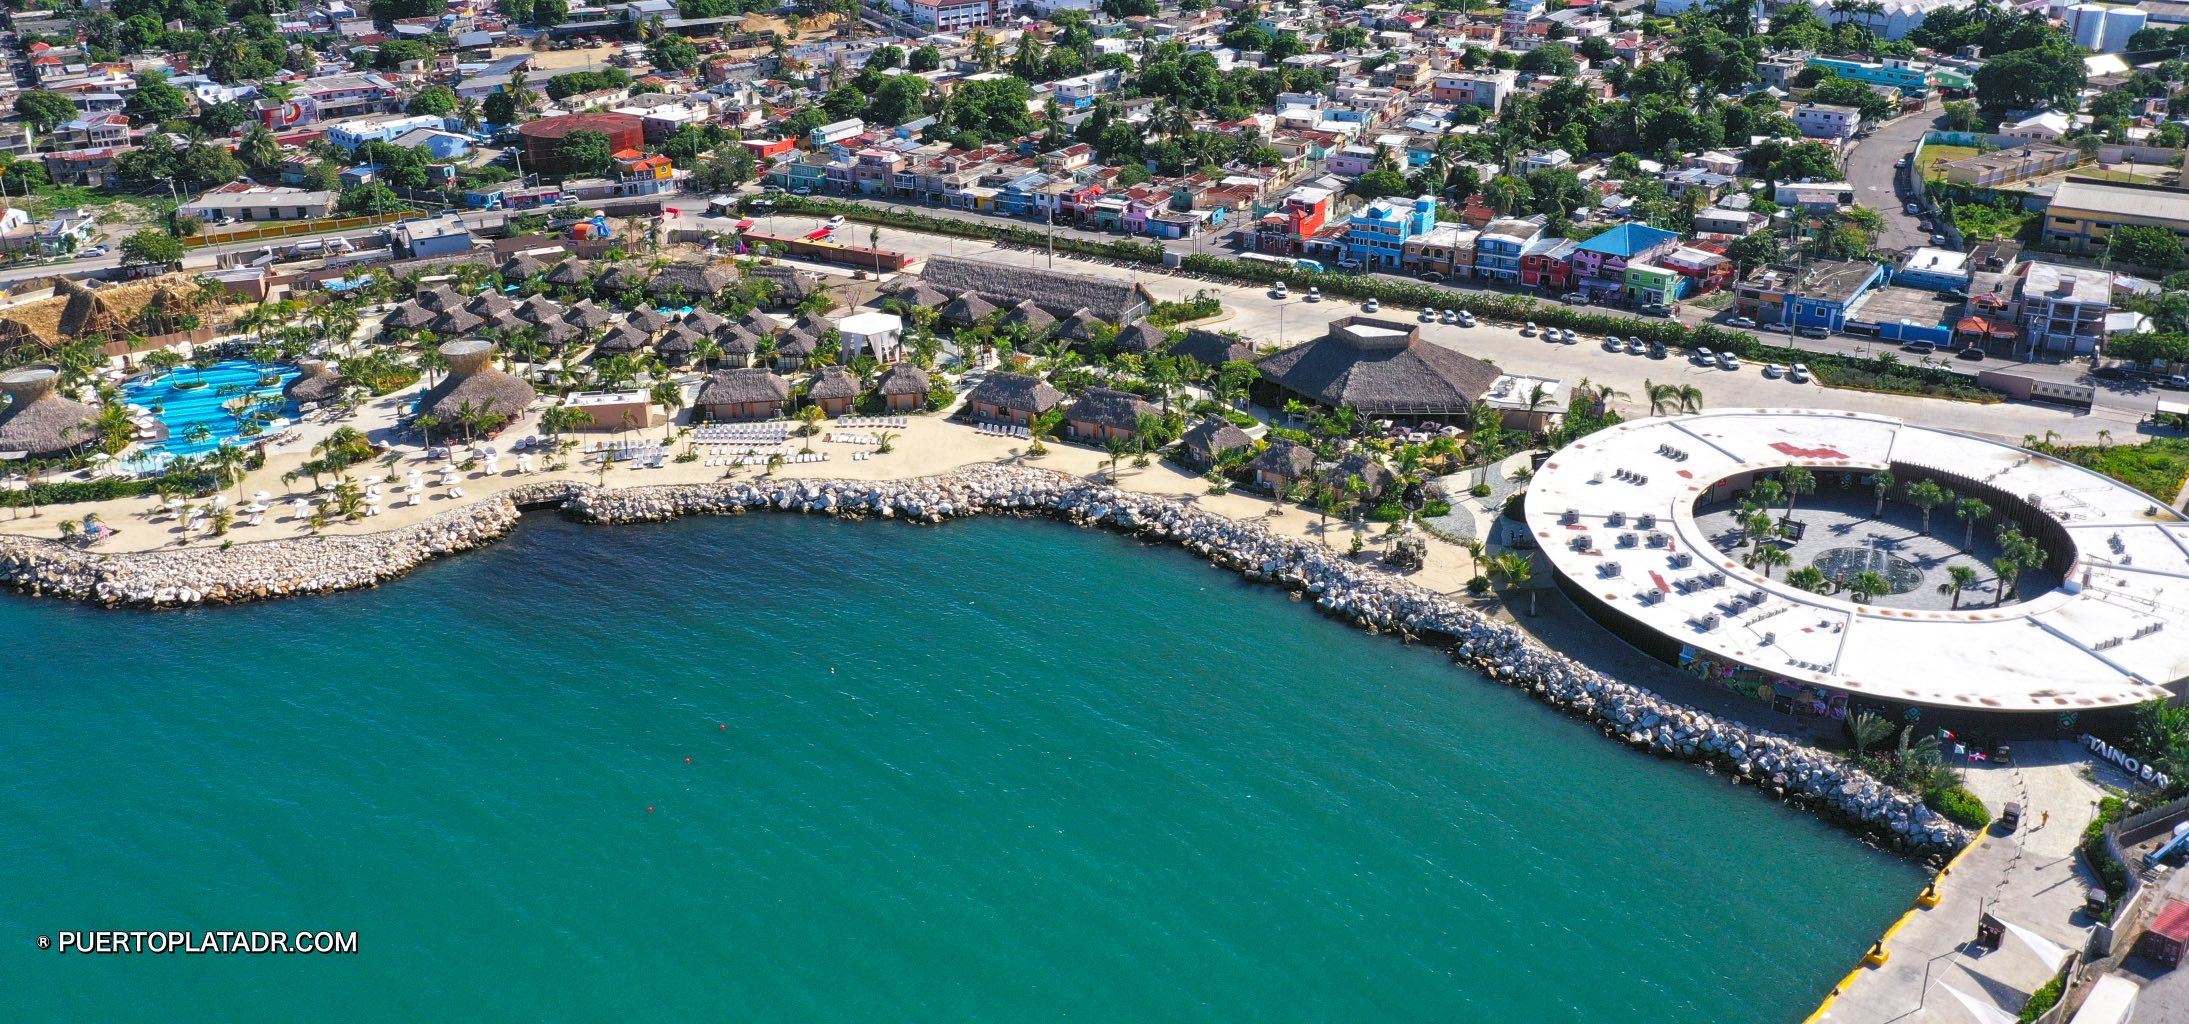 Aerial view of Taino Bay Cruise Port in Puerto Plata, Dominican Republic.